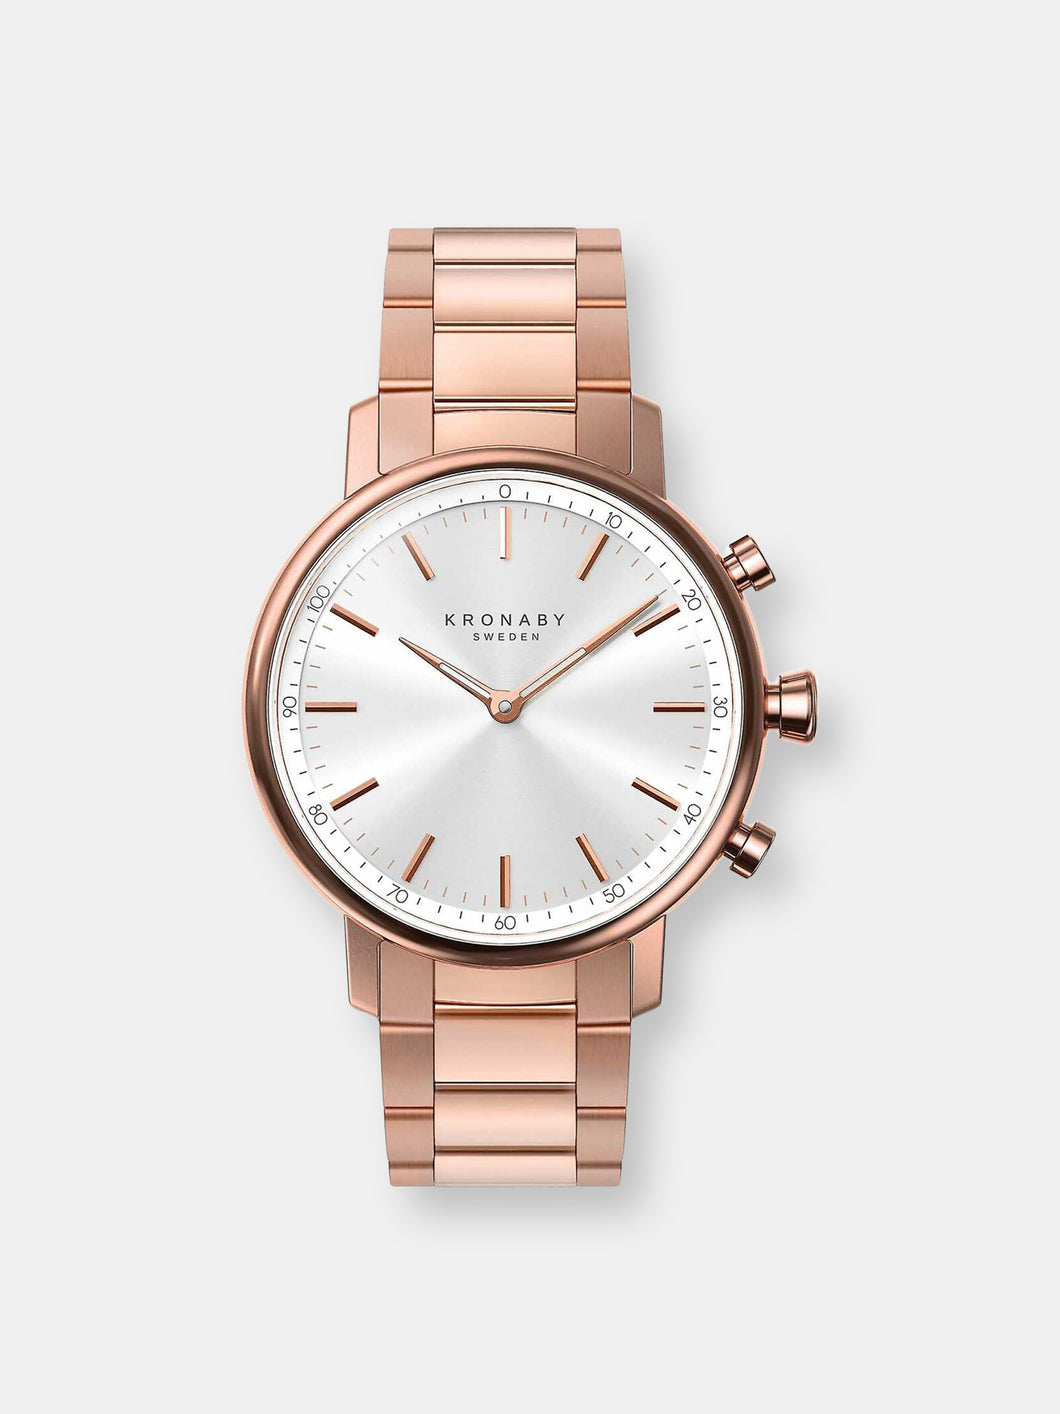 Kronaby Carat S2446-1 Rose-Gold Stainless-Steel Automatic Self Wind Smart Watch